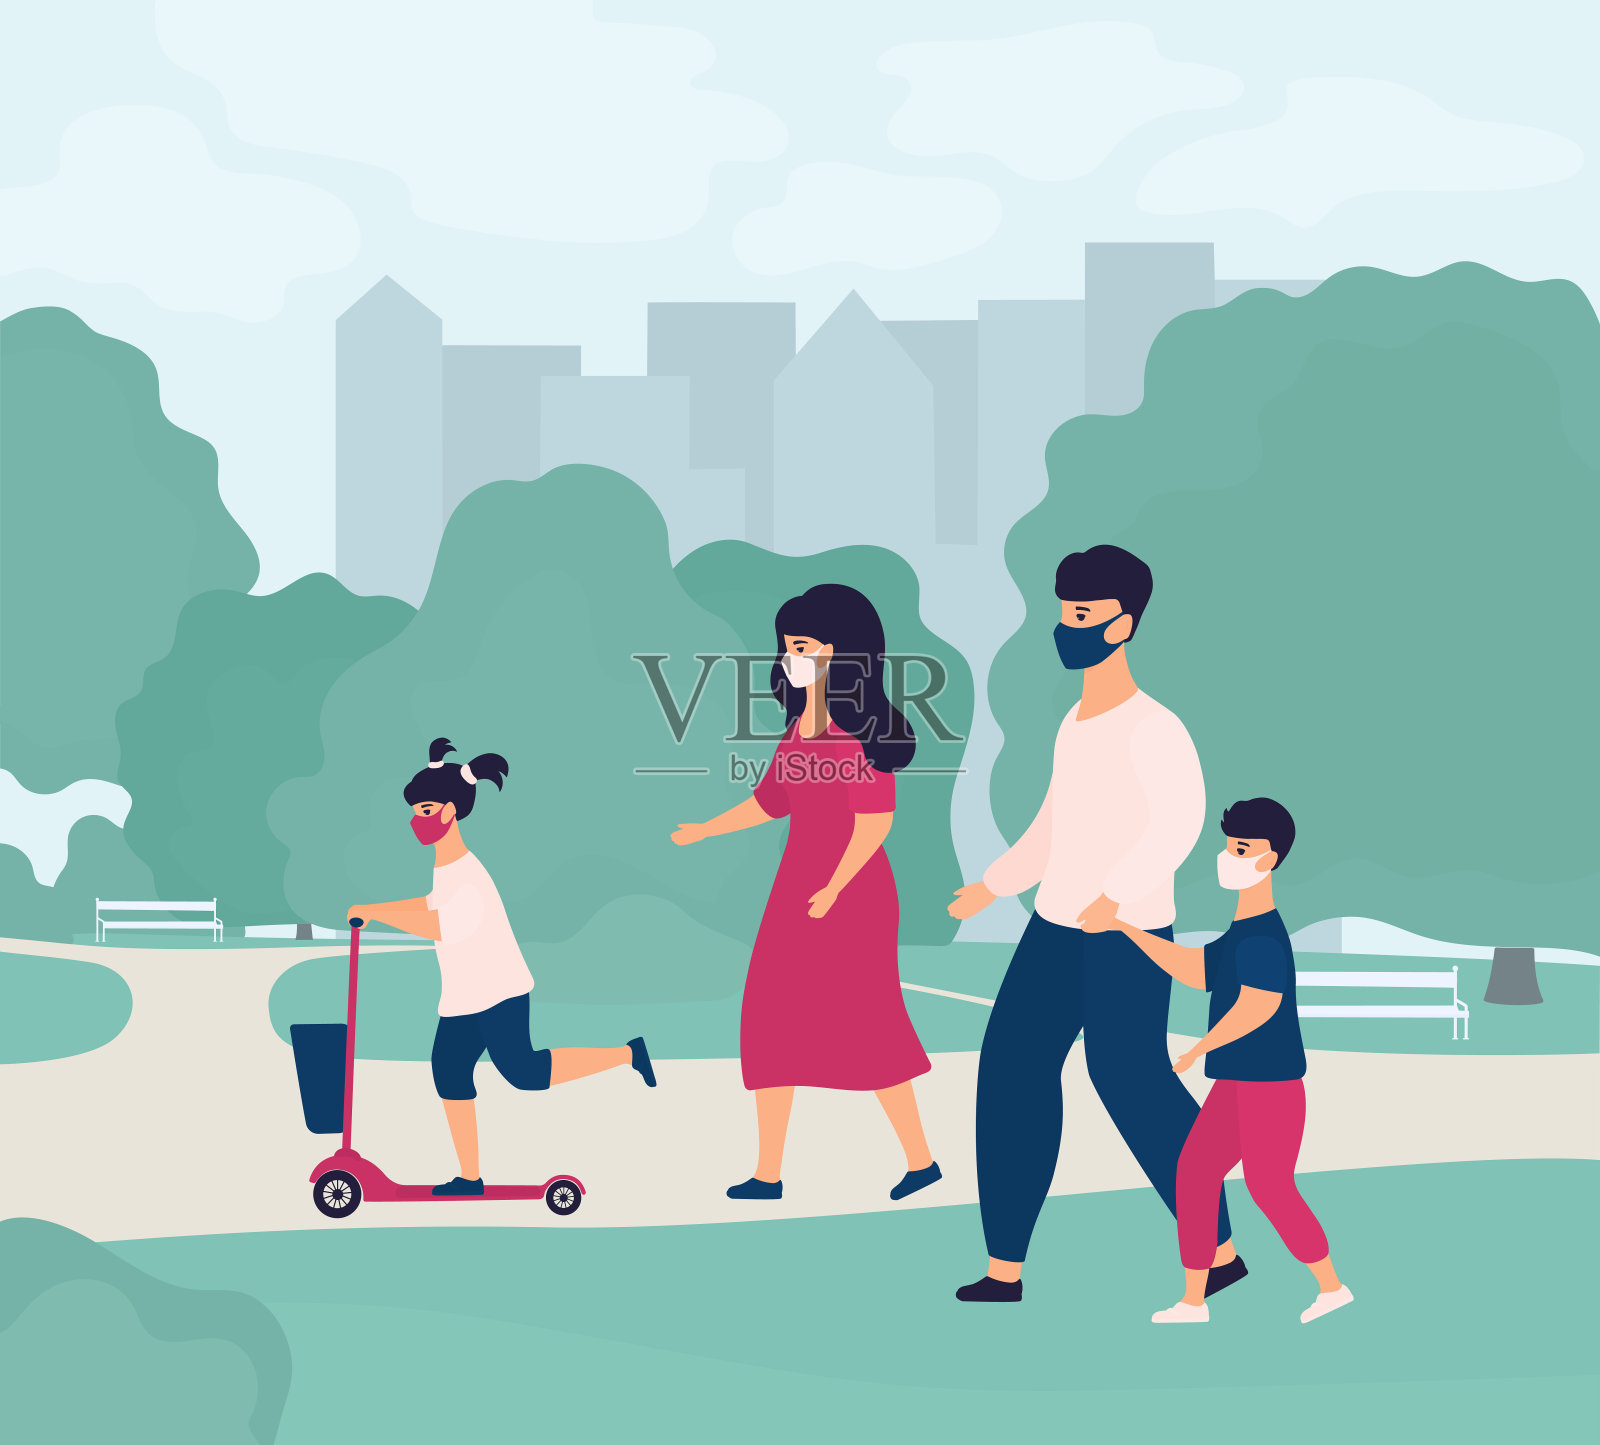 Happy family weekend. Parents with children in protective masks walk in a city park during the coronavirus quarantine COVID-19. The father leads son by the hand. A girl rides a scooter.插画图片素材